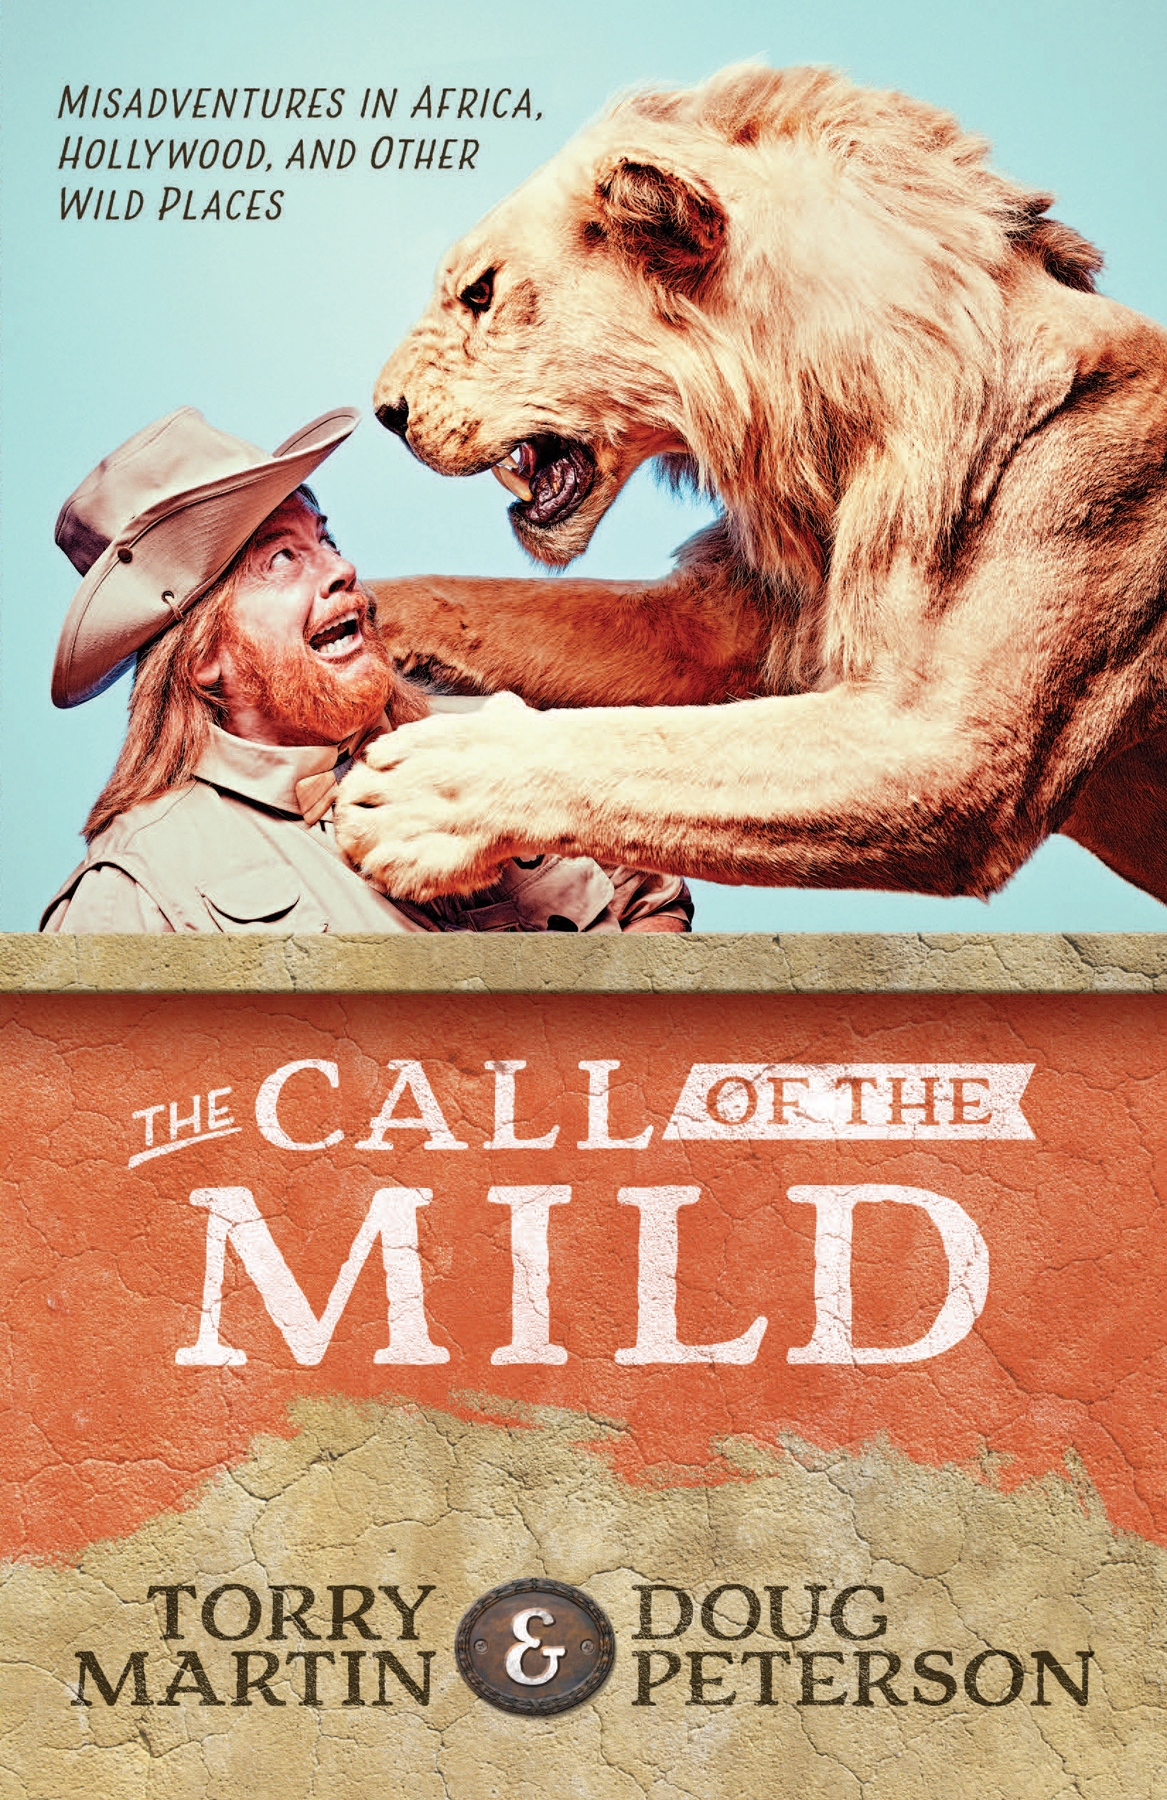 The Call of the Mild by Torry Martin & Doug Peterson